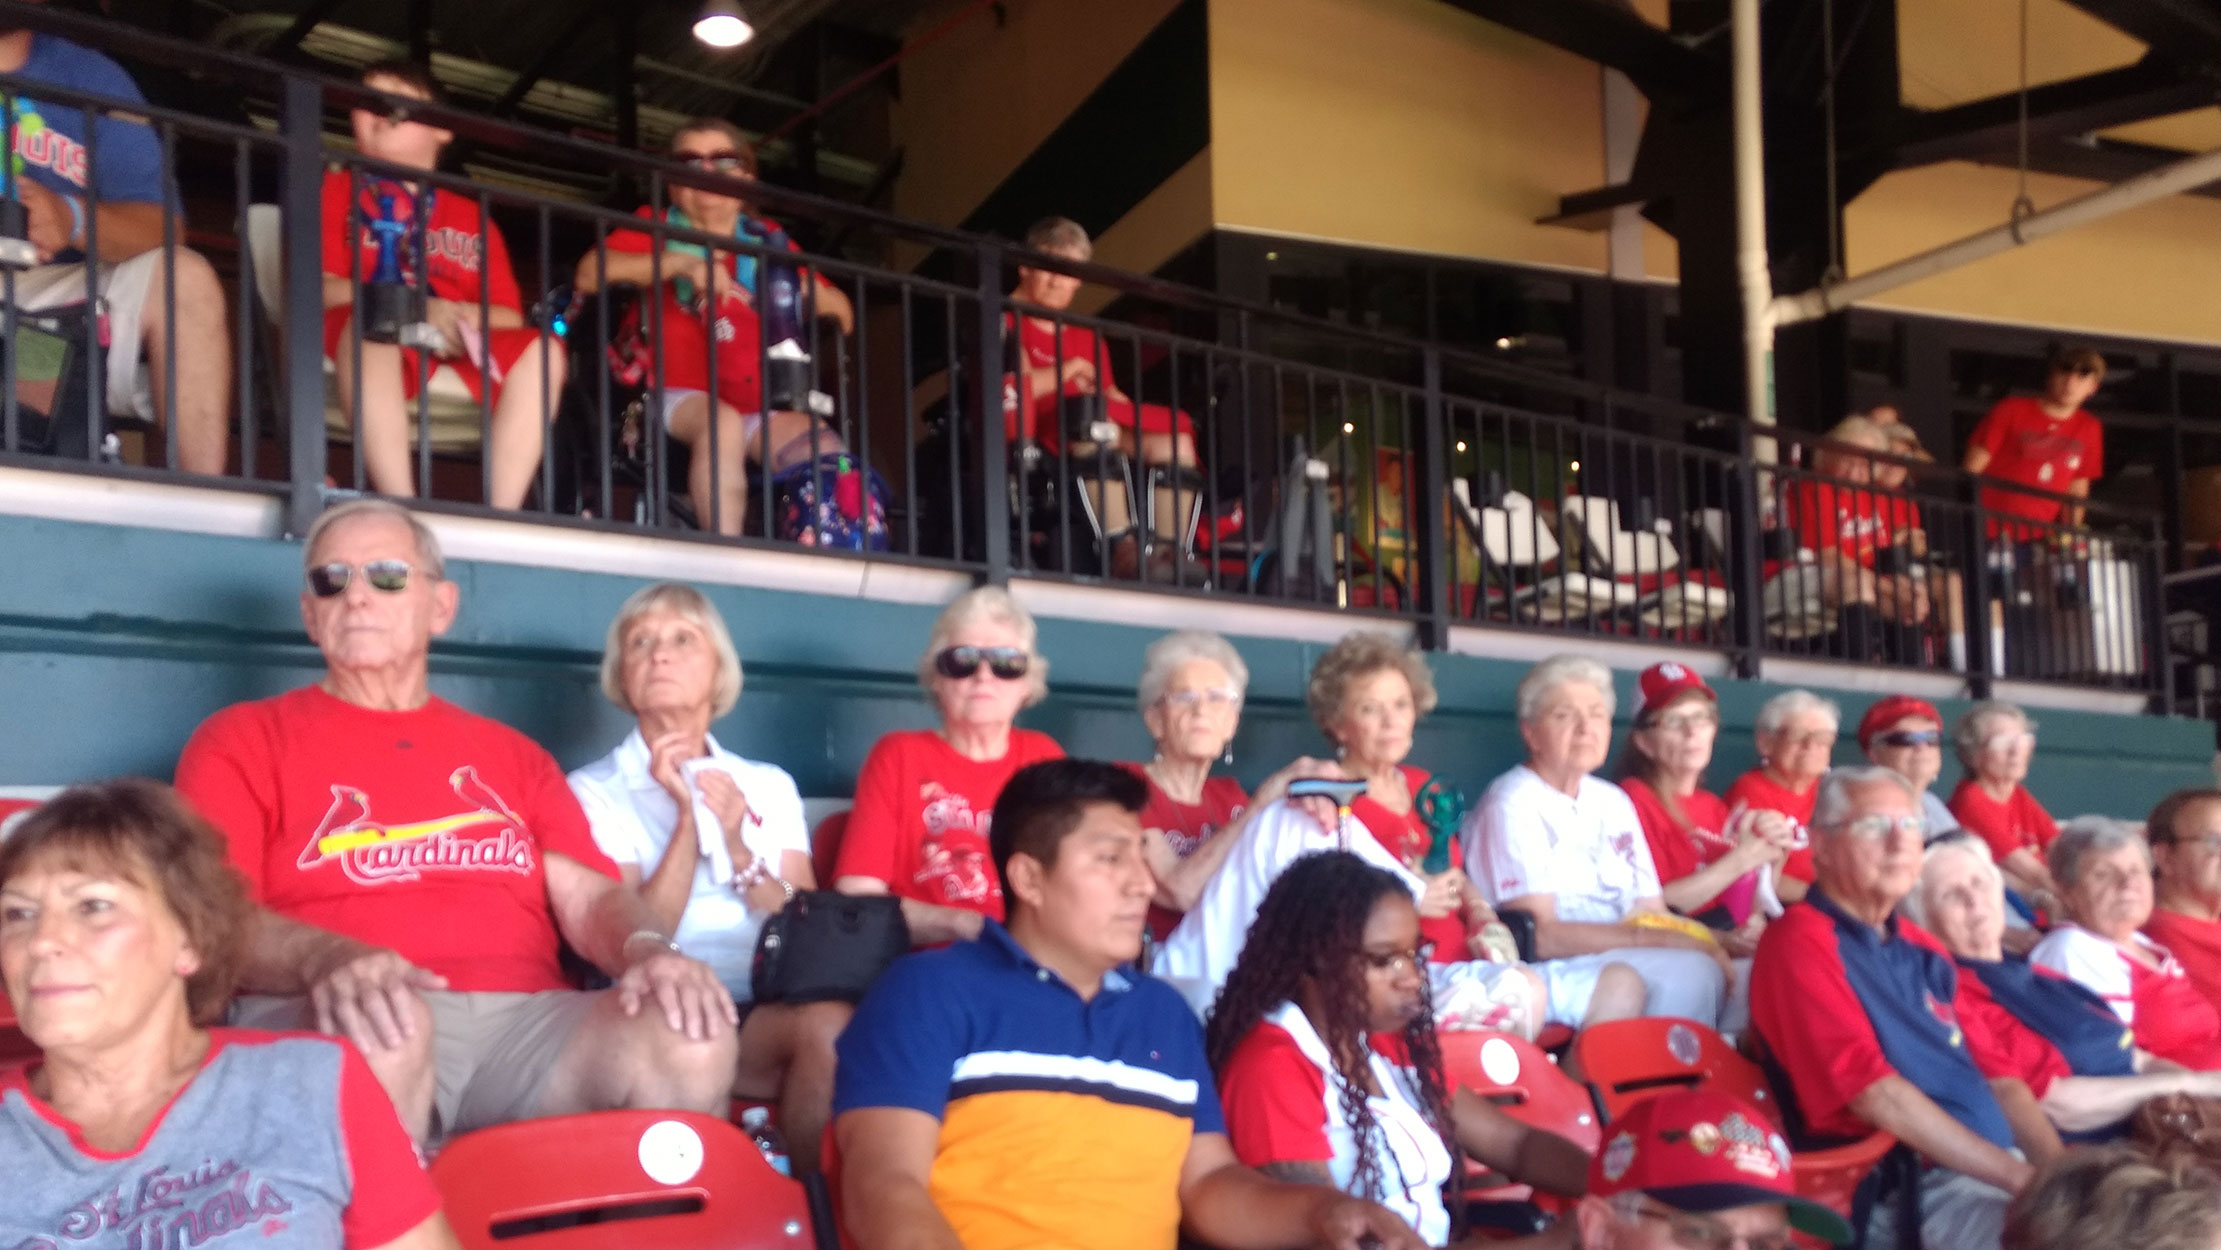 Wyndham Park residents enjoy their time at the Cardinals game.